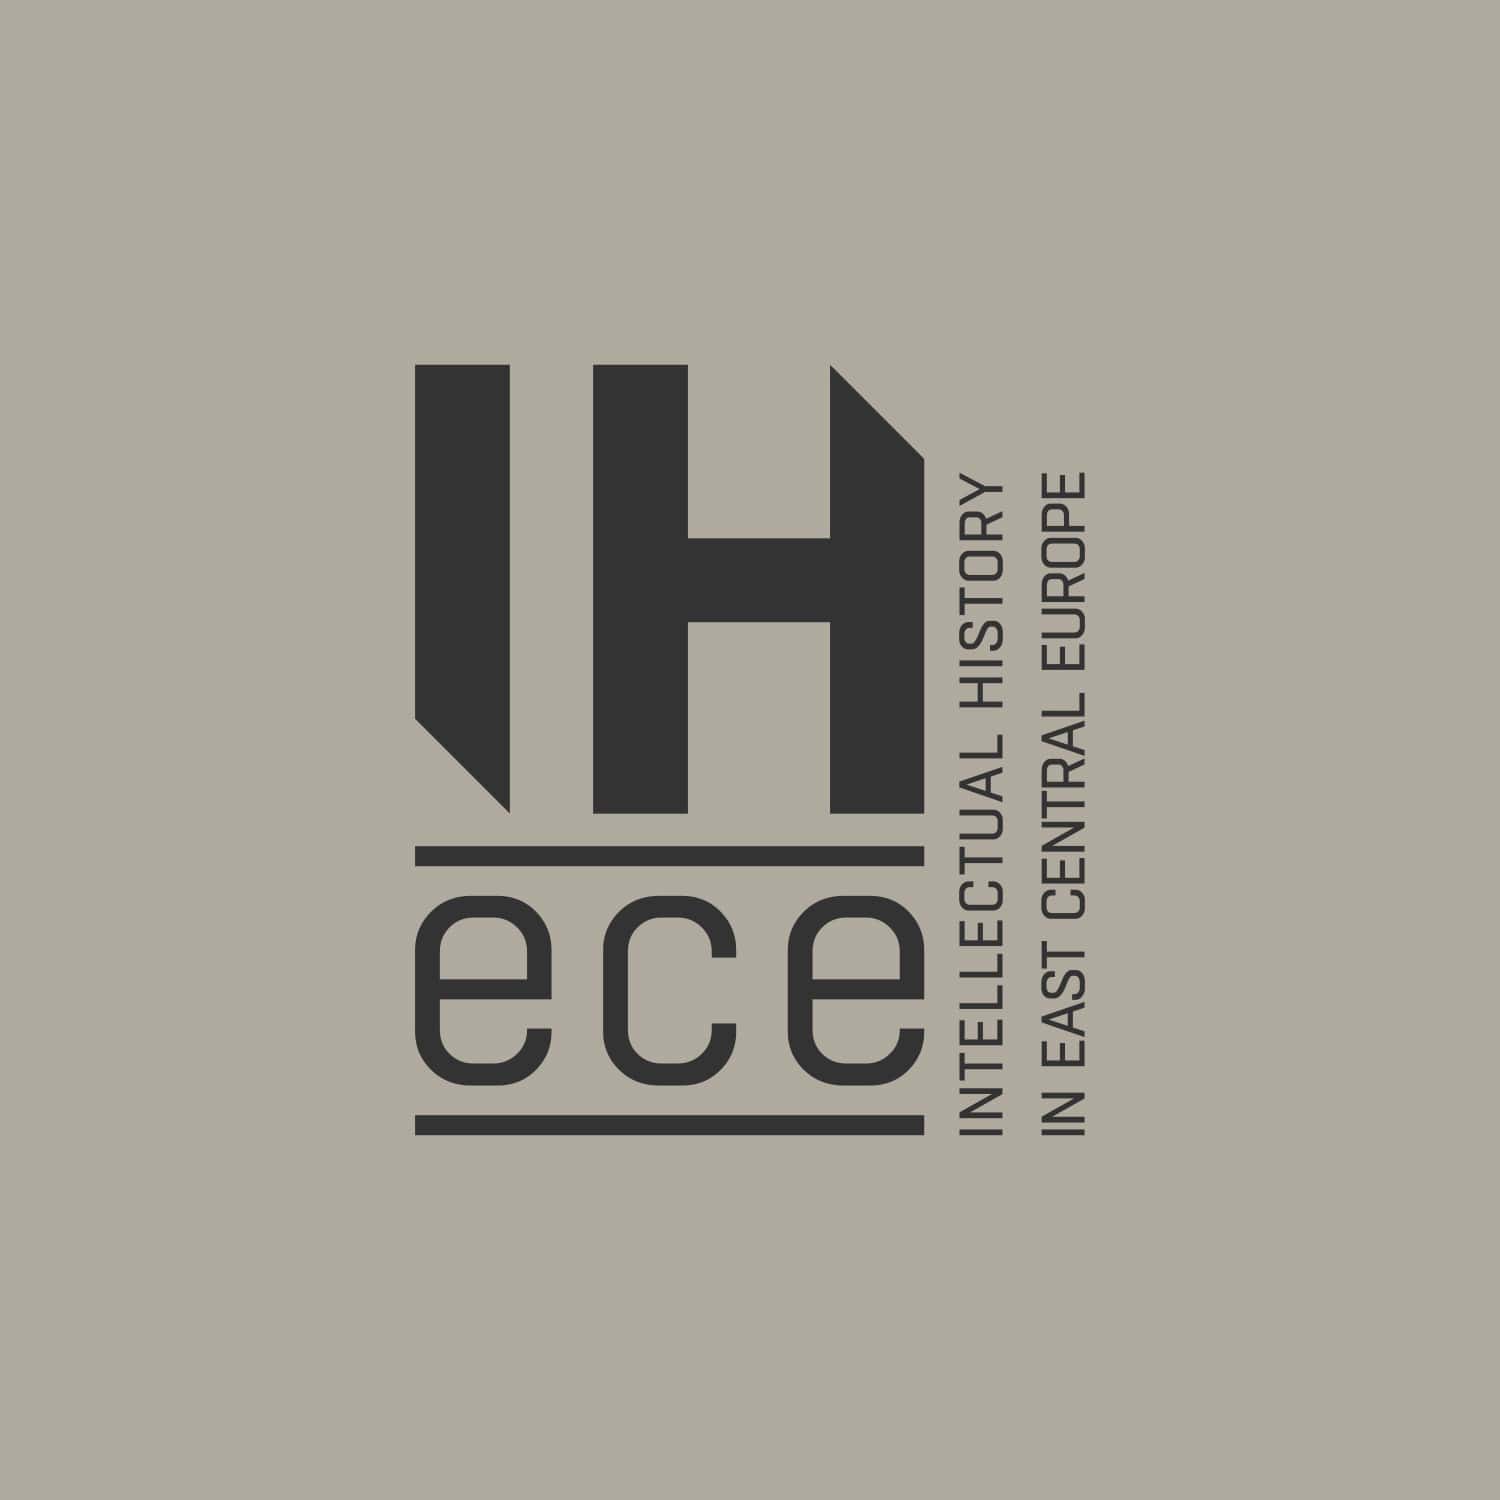 IH ECE Intellectual history in East Central Europe project logo